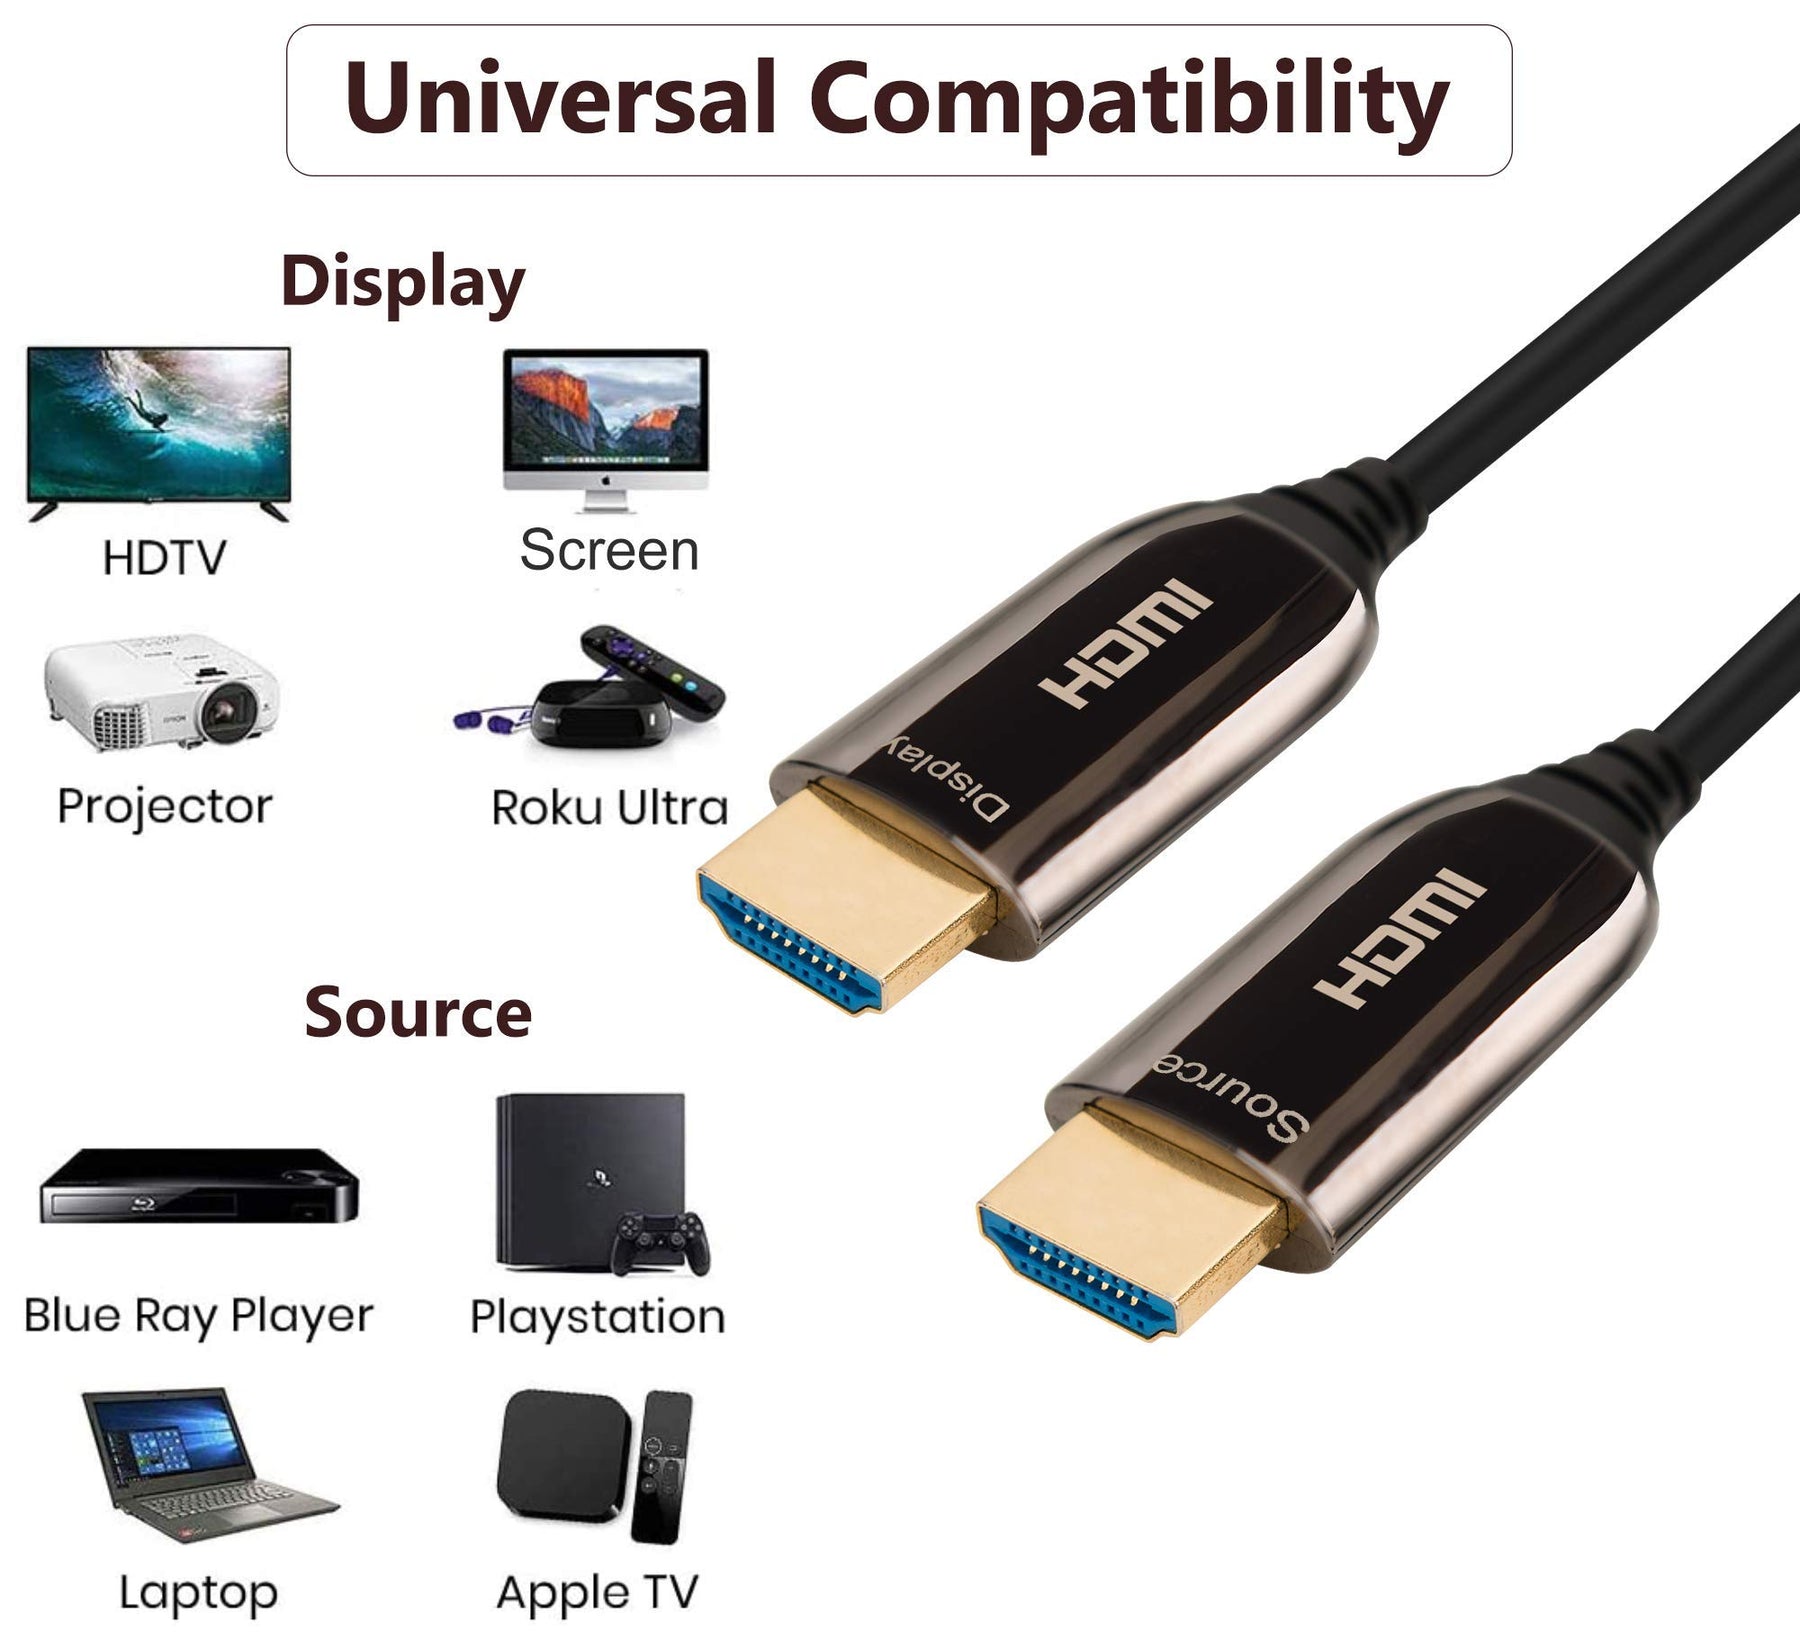 HDMI 8K fiber optic cable HDMI 30M cable Ultra high speed cable 48 Gbps 2.1 Support for 8K cable at 60 Hz, 4K at 120 Hz, 4320p, 4: 4: 4, HDR10 +, HDCP 2.2, 3D, PS4, PS3 - IBRA